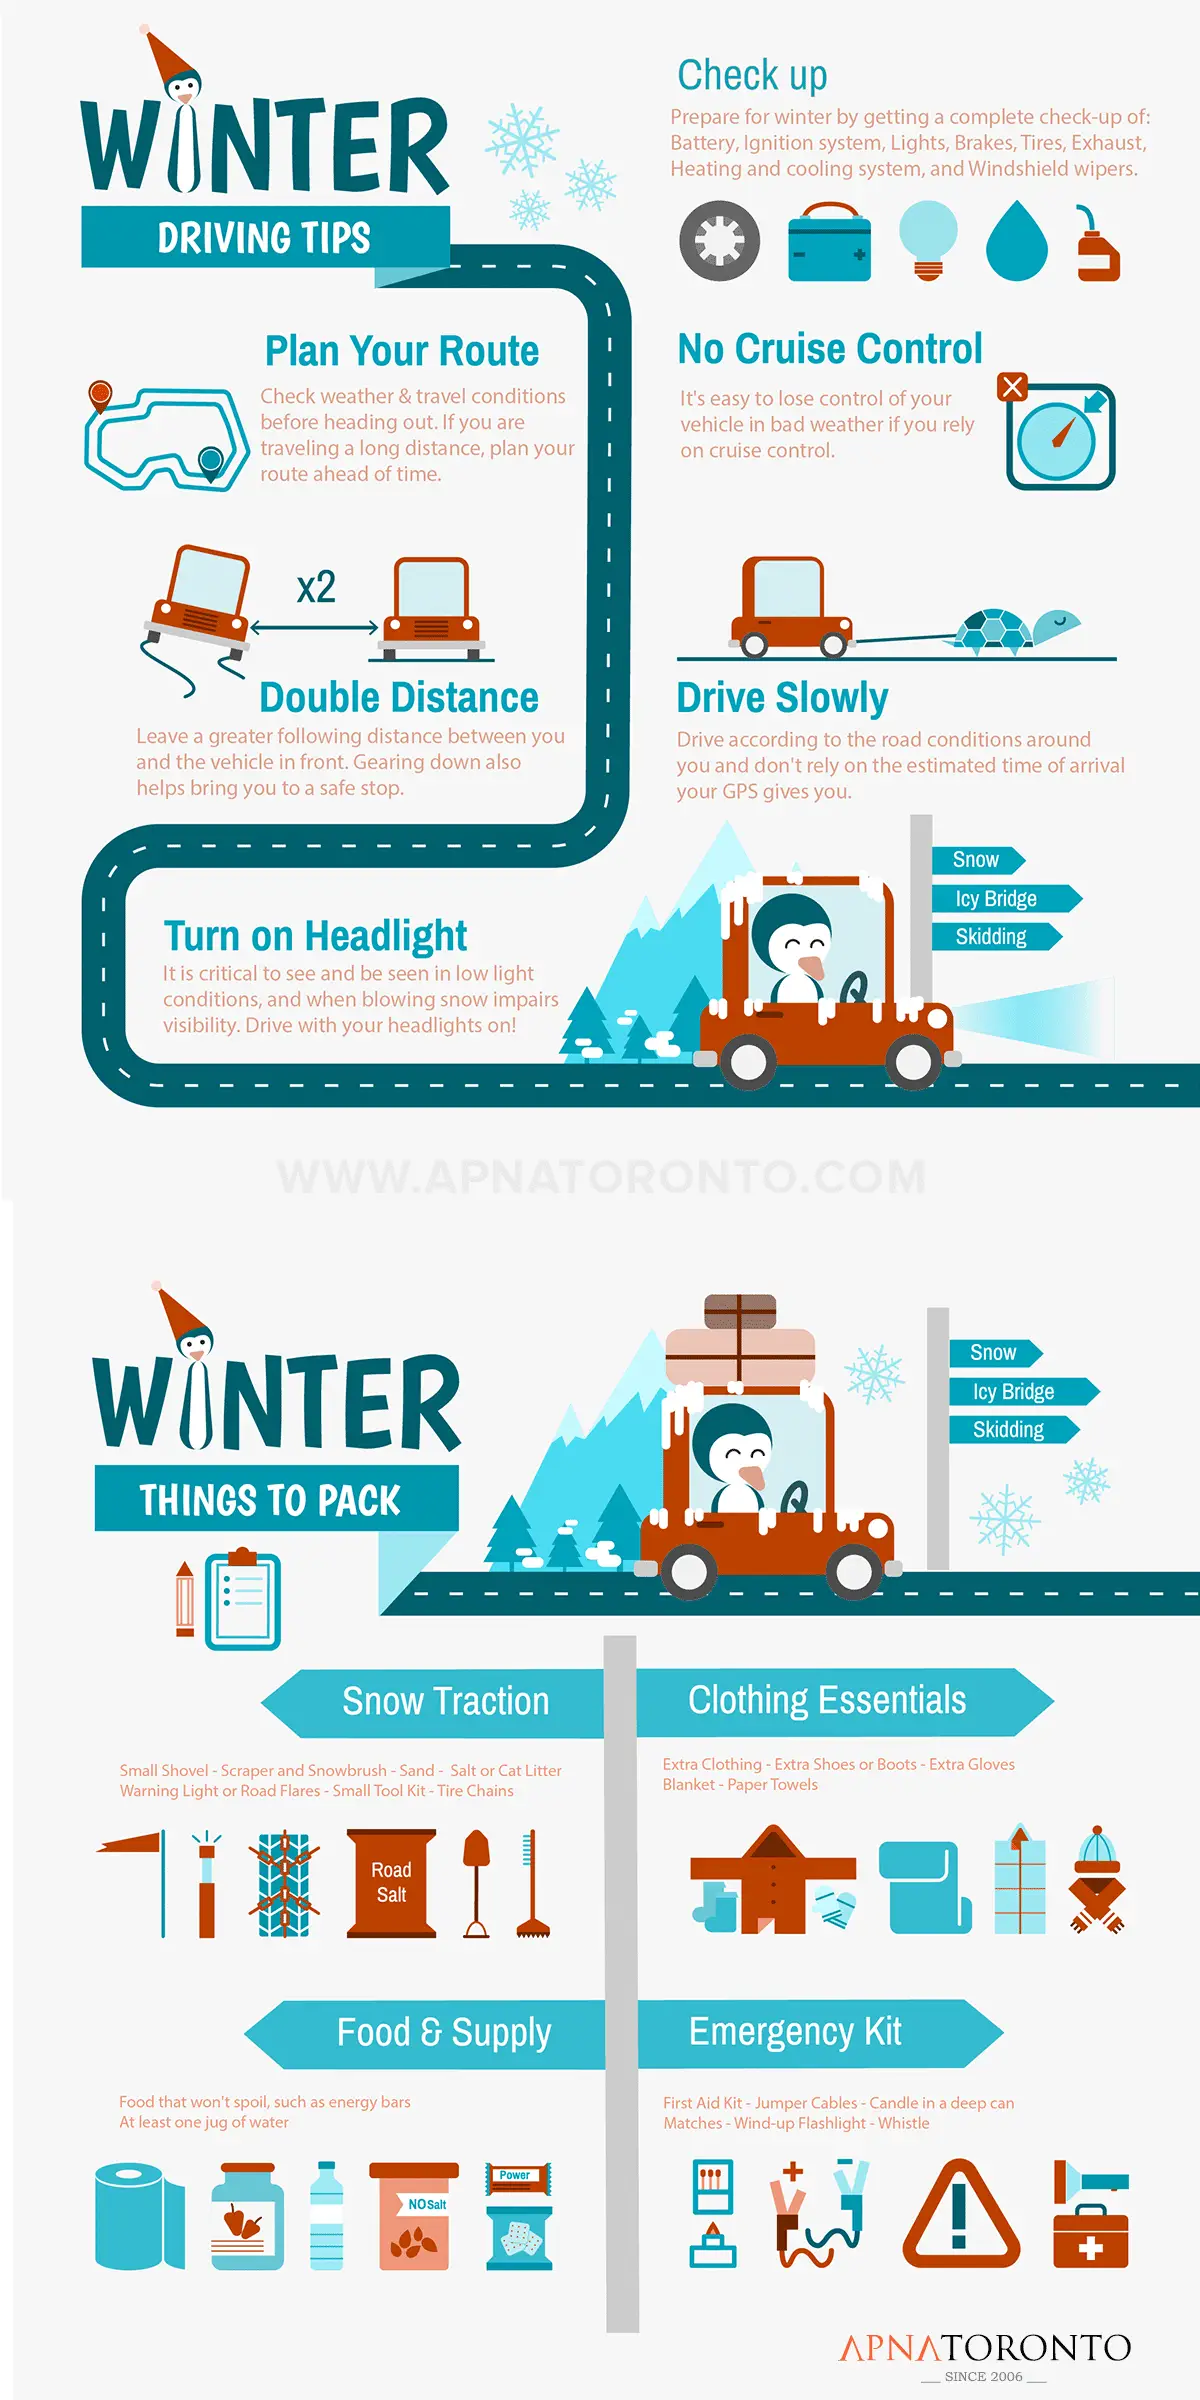 Winter Driving Tips 